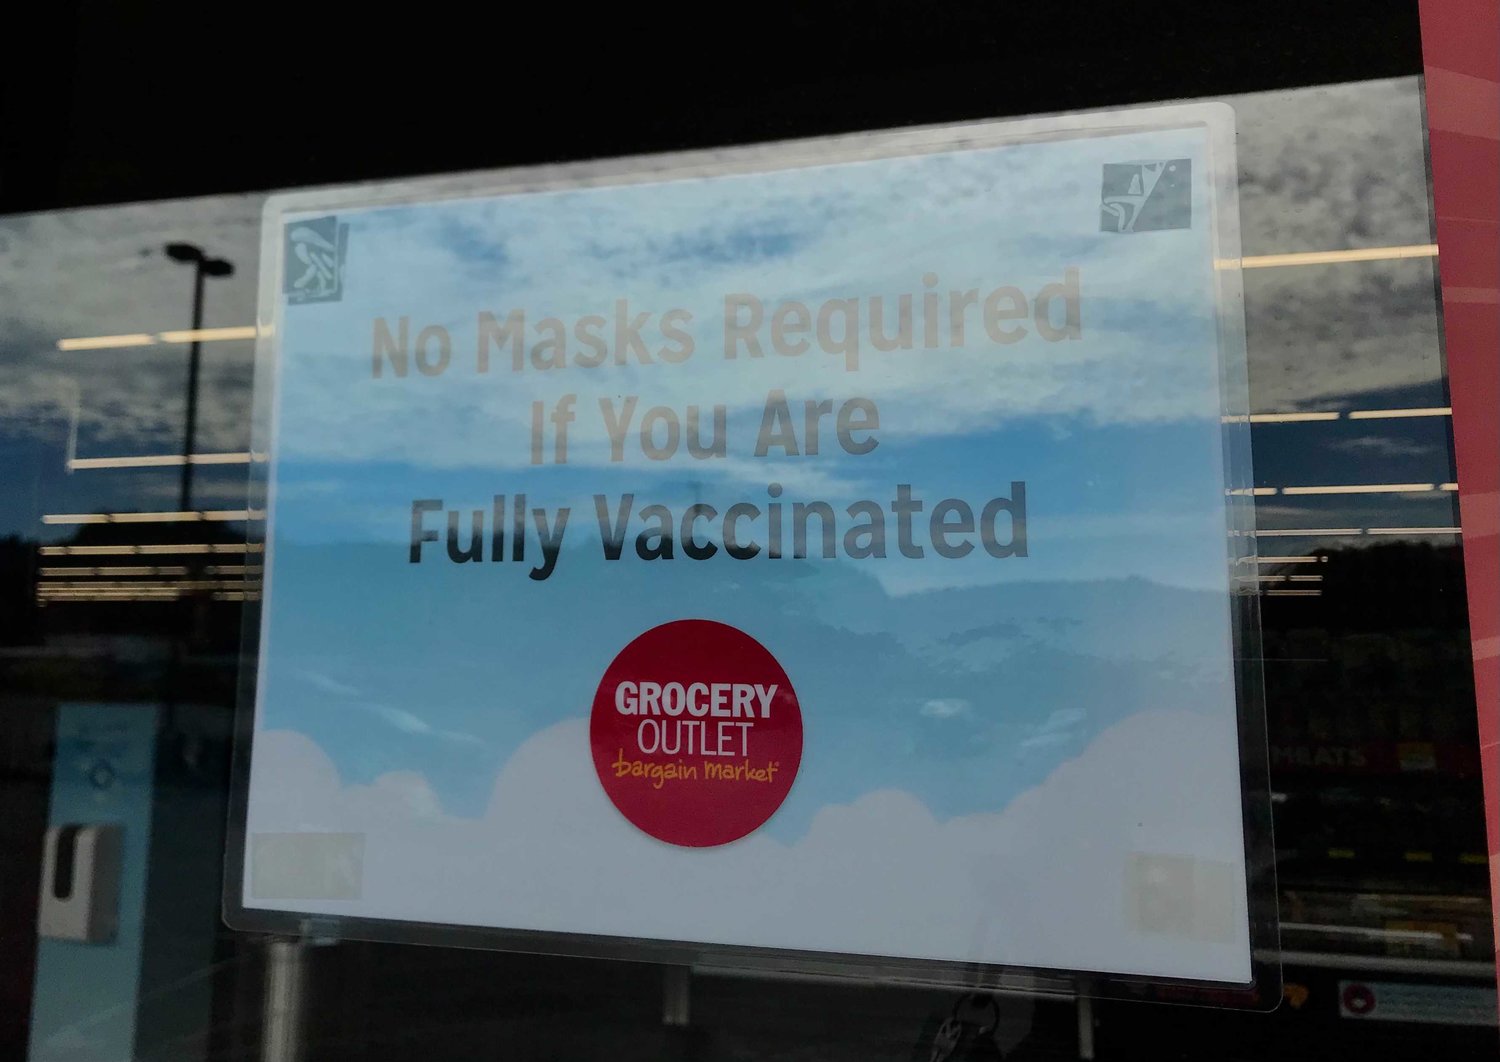 While many stores are still requiring masks, others — such as Chehalis’ Grocery Outlet — have posted signs informing fully-vaccinated customers that they can ditch the masks.